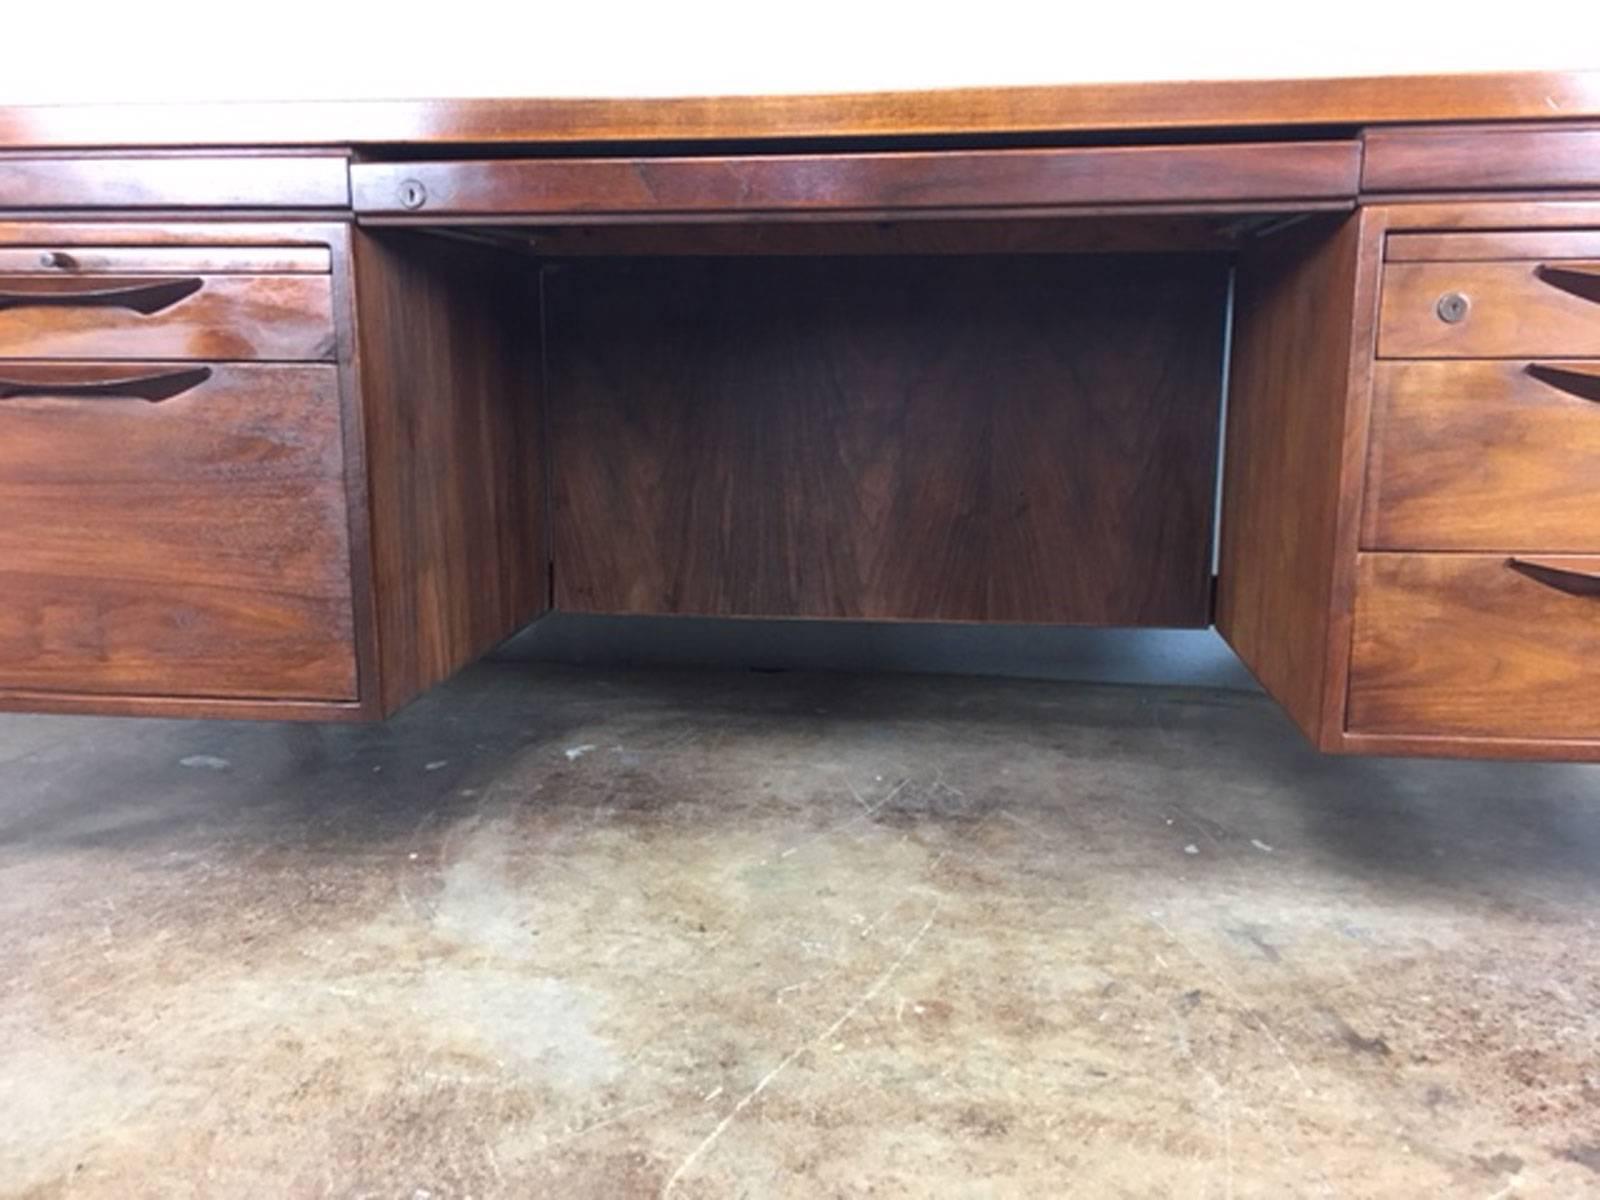 Stunning refurbished executive desk by Jens Risom. Handsome medium walnut. Large surface. Wood pull out working trays. Four drawers.